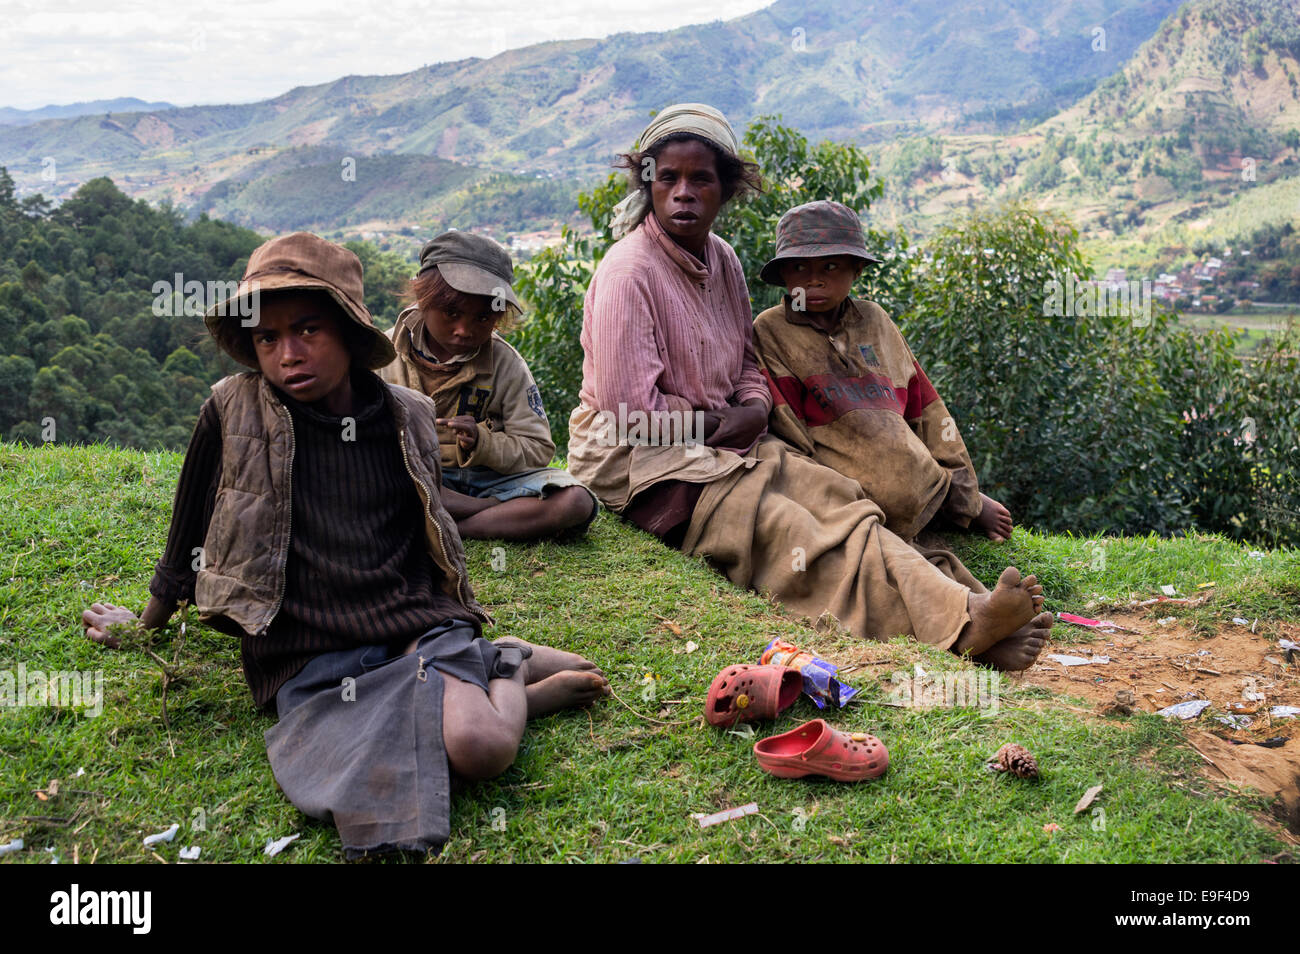 A madagascan family sitting by the side of a road Stock Photo